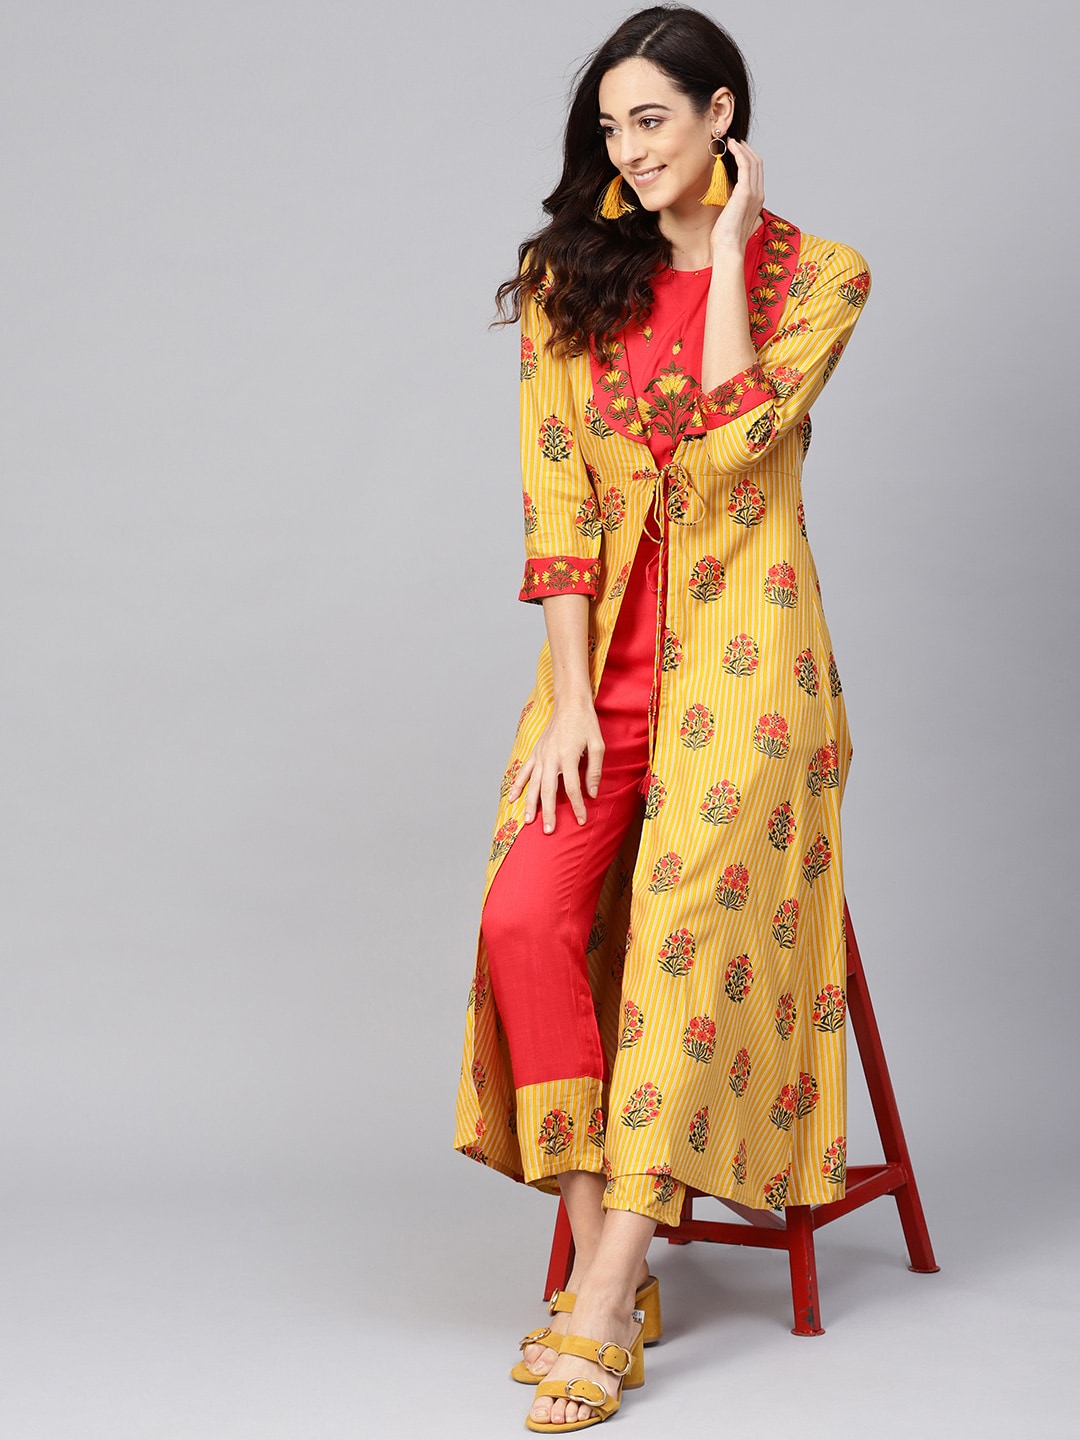 Meeranshi Women Orange & Mustard Yellow Embroidered Crop Top with Trousers & Ehtnic Jacket Price in India